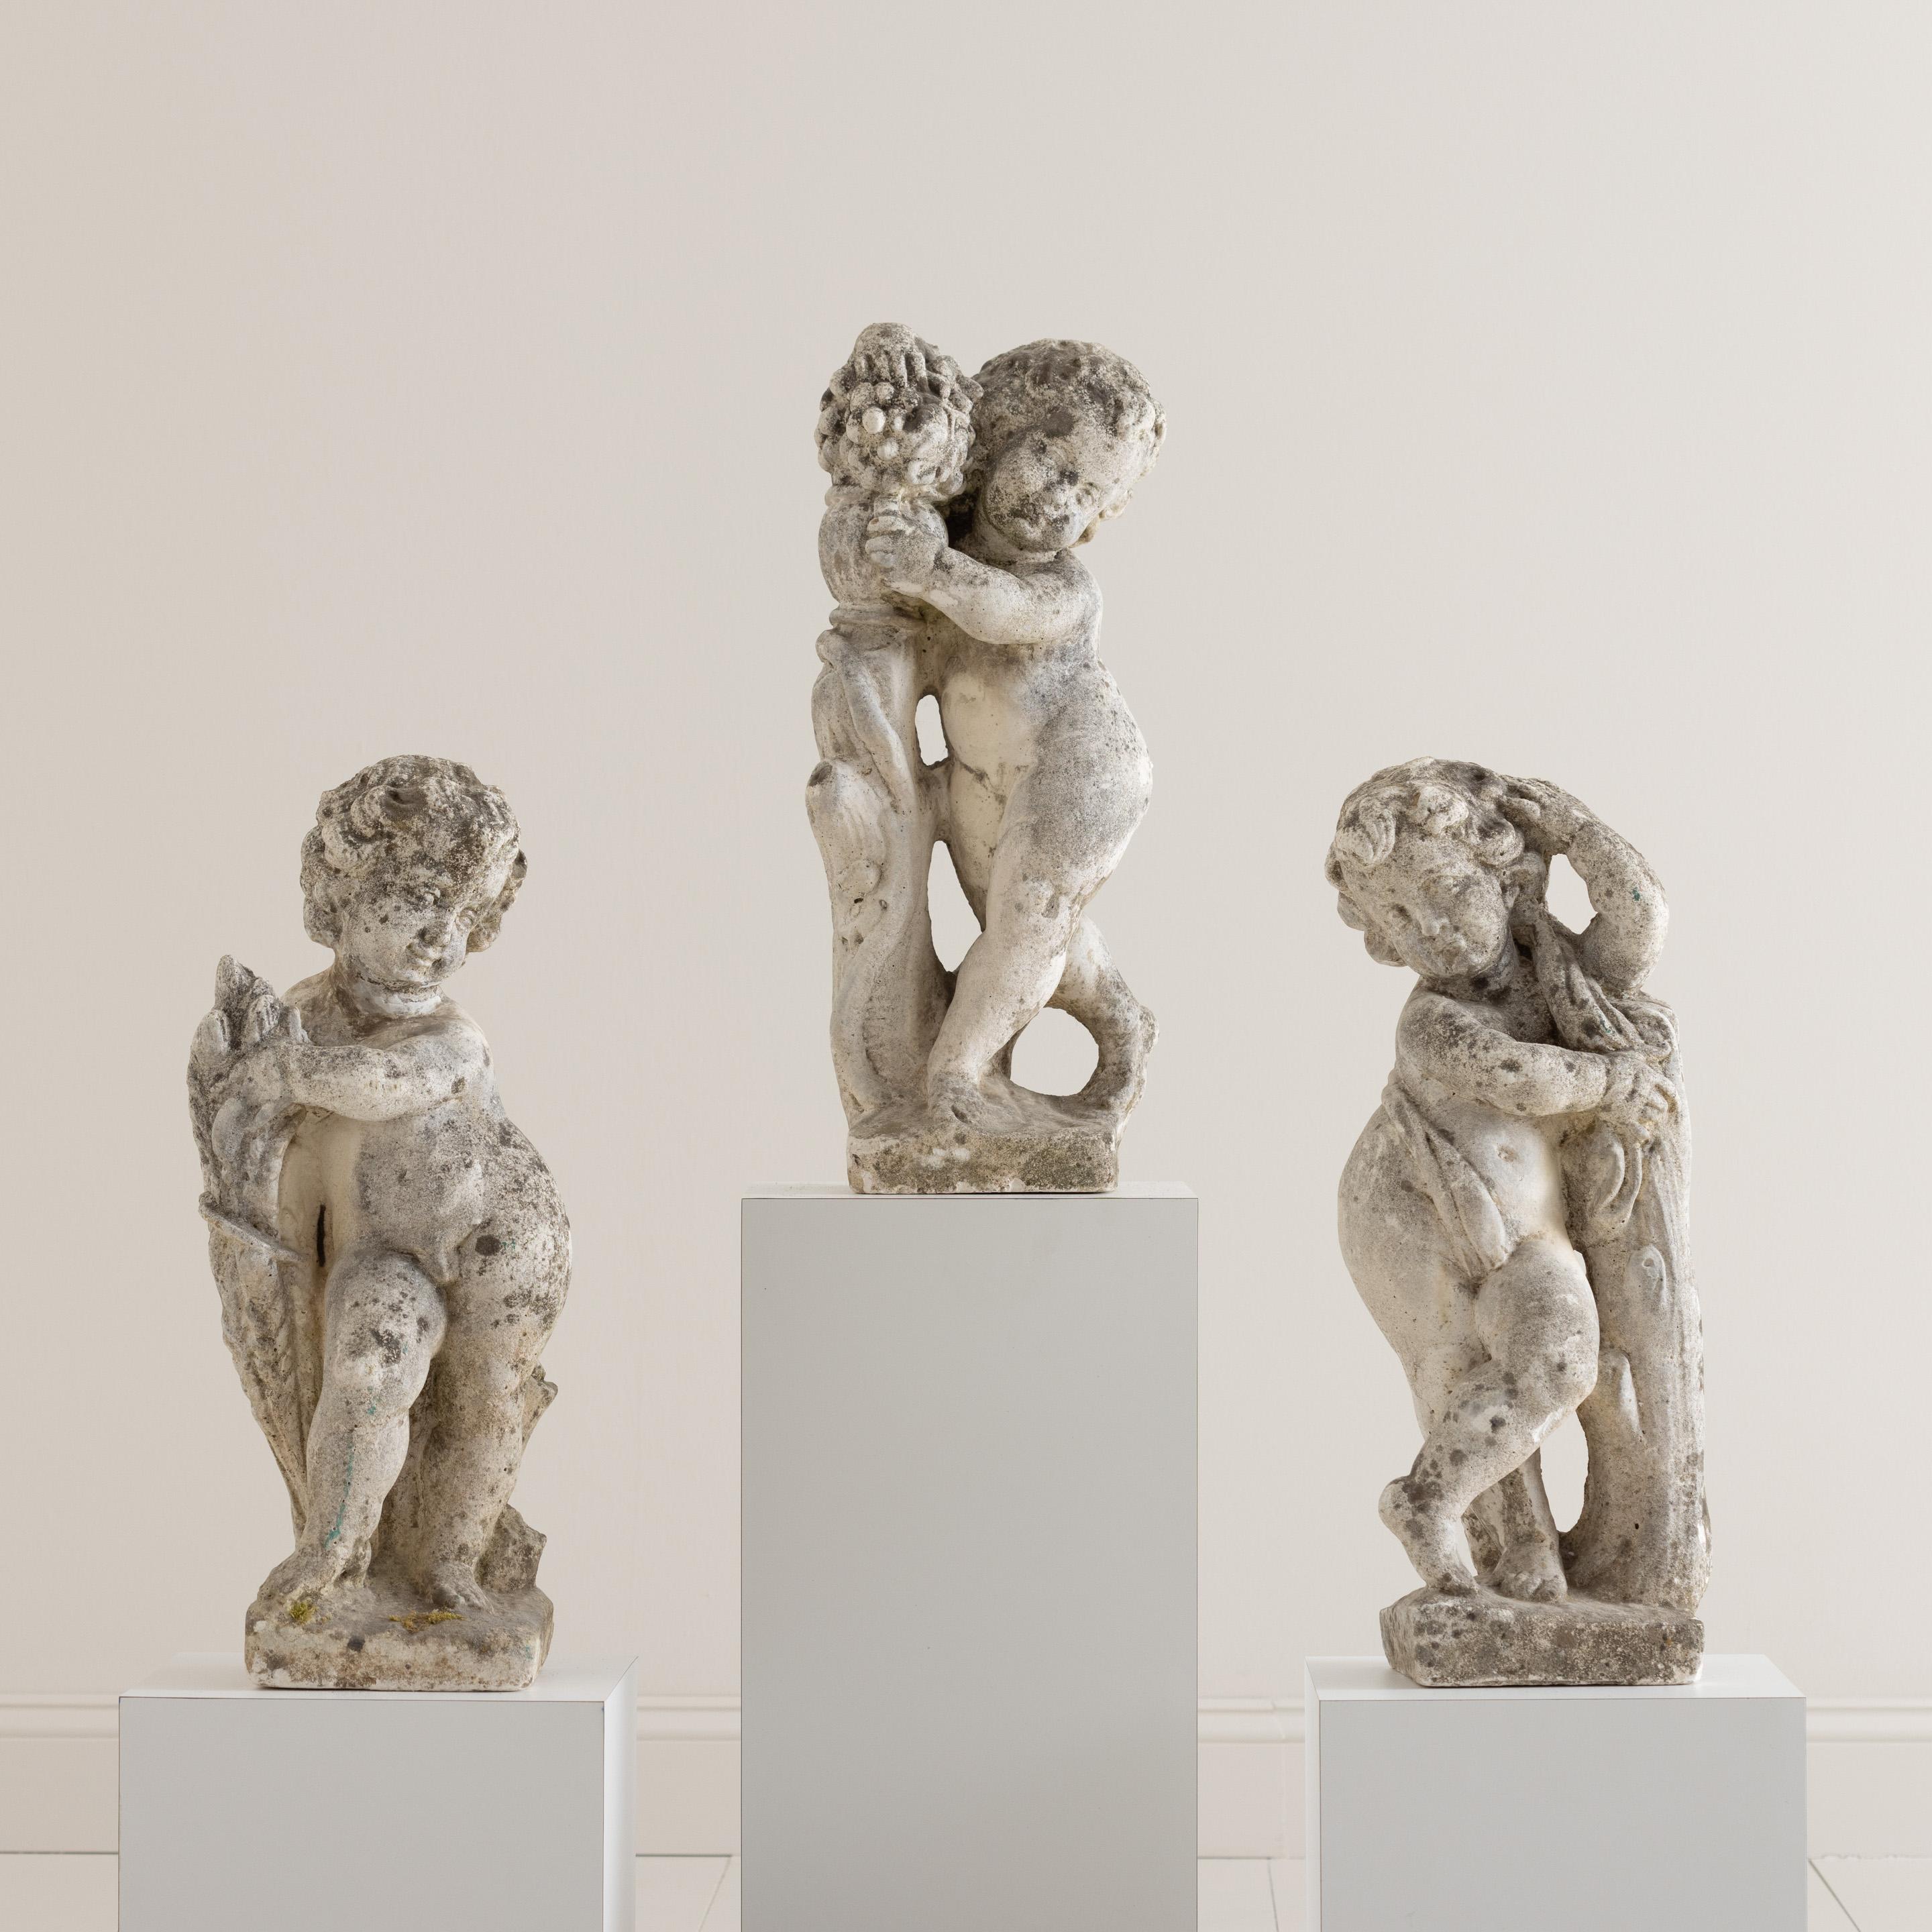 Sold separately.  Center featured cherub is sold. Early 20th century concrete Italian garden statues of cherubs /putti figures, c. 1920. These charming, angelic statues are suitable for outdoor use. 


We offer expedited, fully-insured, custom